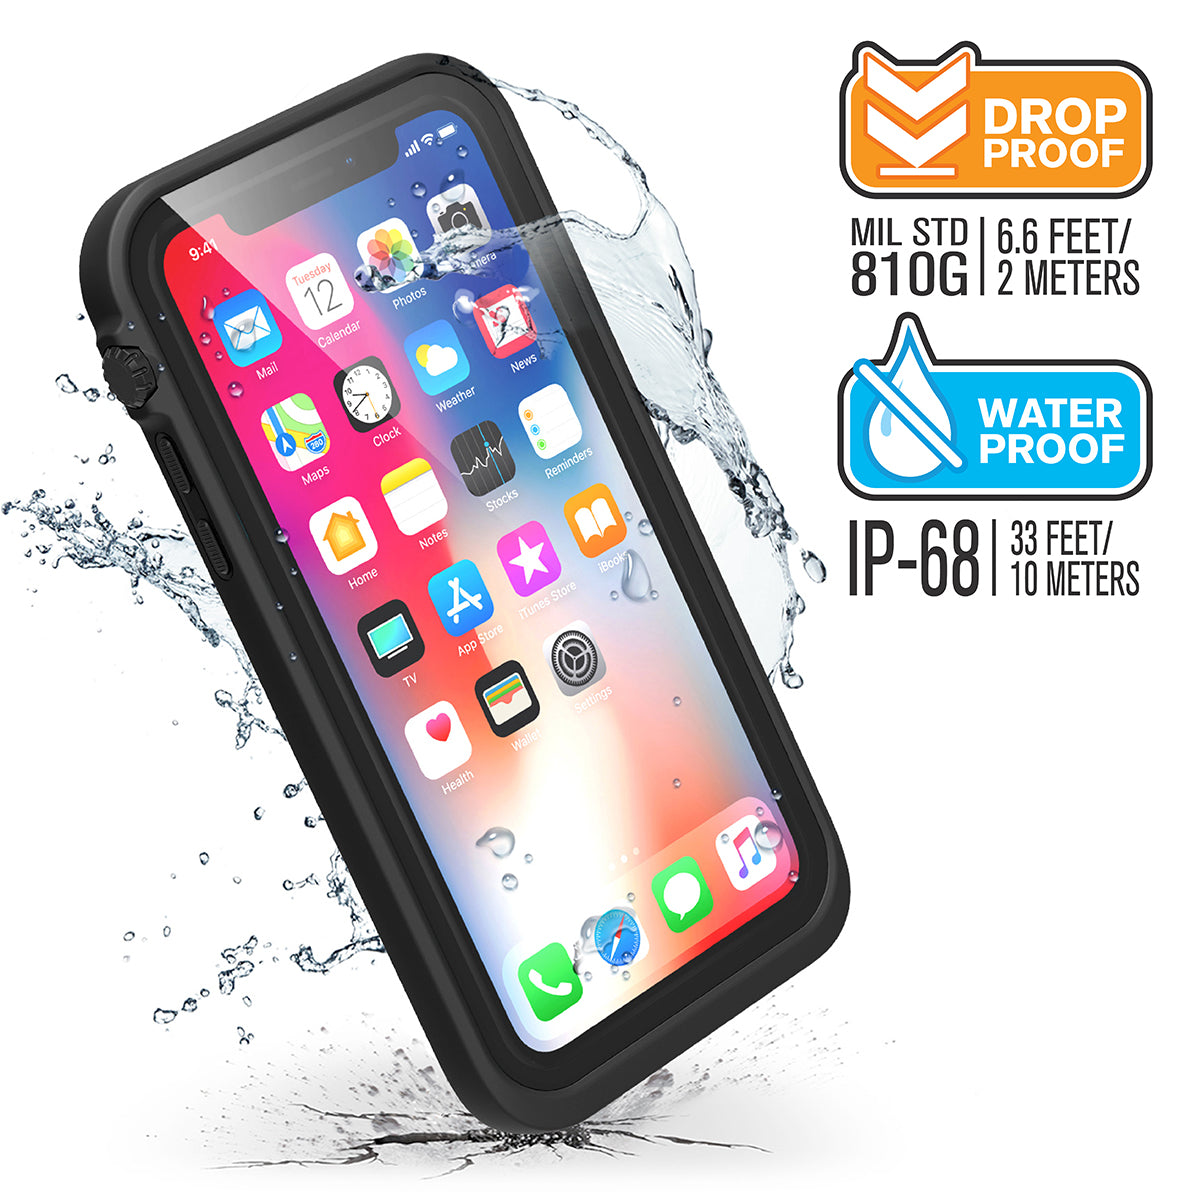 Catalyst iphone x/xr/xs/xs max waterproof case x showing-how-drop-proof-and-water-proof-the-case-is-in stealth-black black text reads drop proof MIL STD 810G 6.6 FEET 2 METERS WATER PROOF IP-68 33 FEET 10 METERS